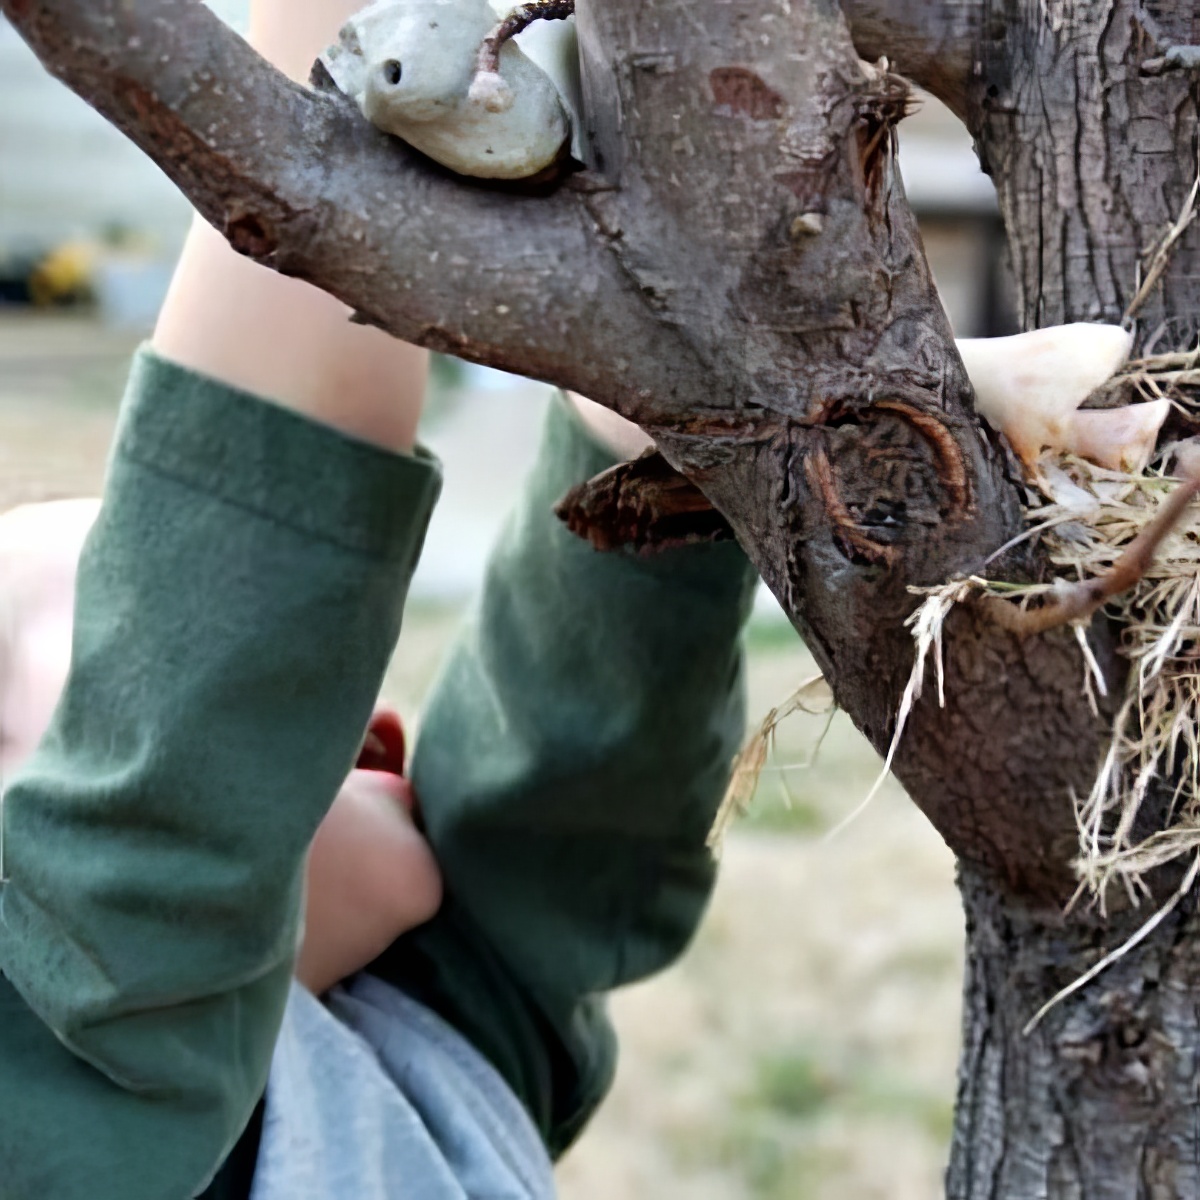 building-nests-in-tree-kab, nest-hunting activity, fun family spring activities, activities in spring